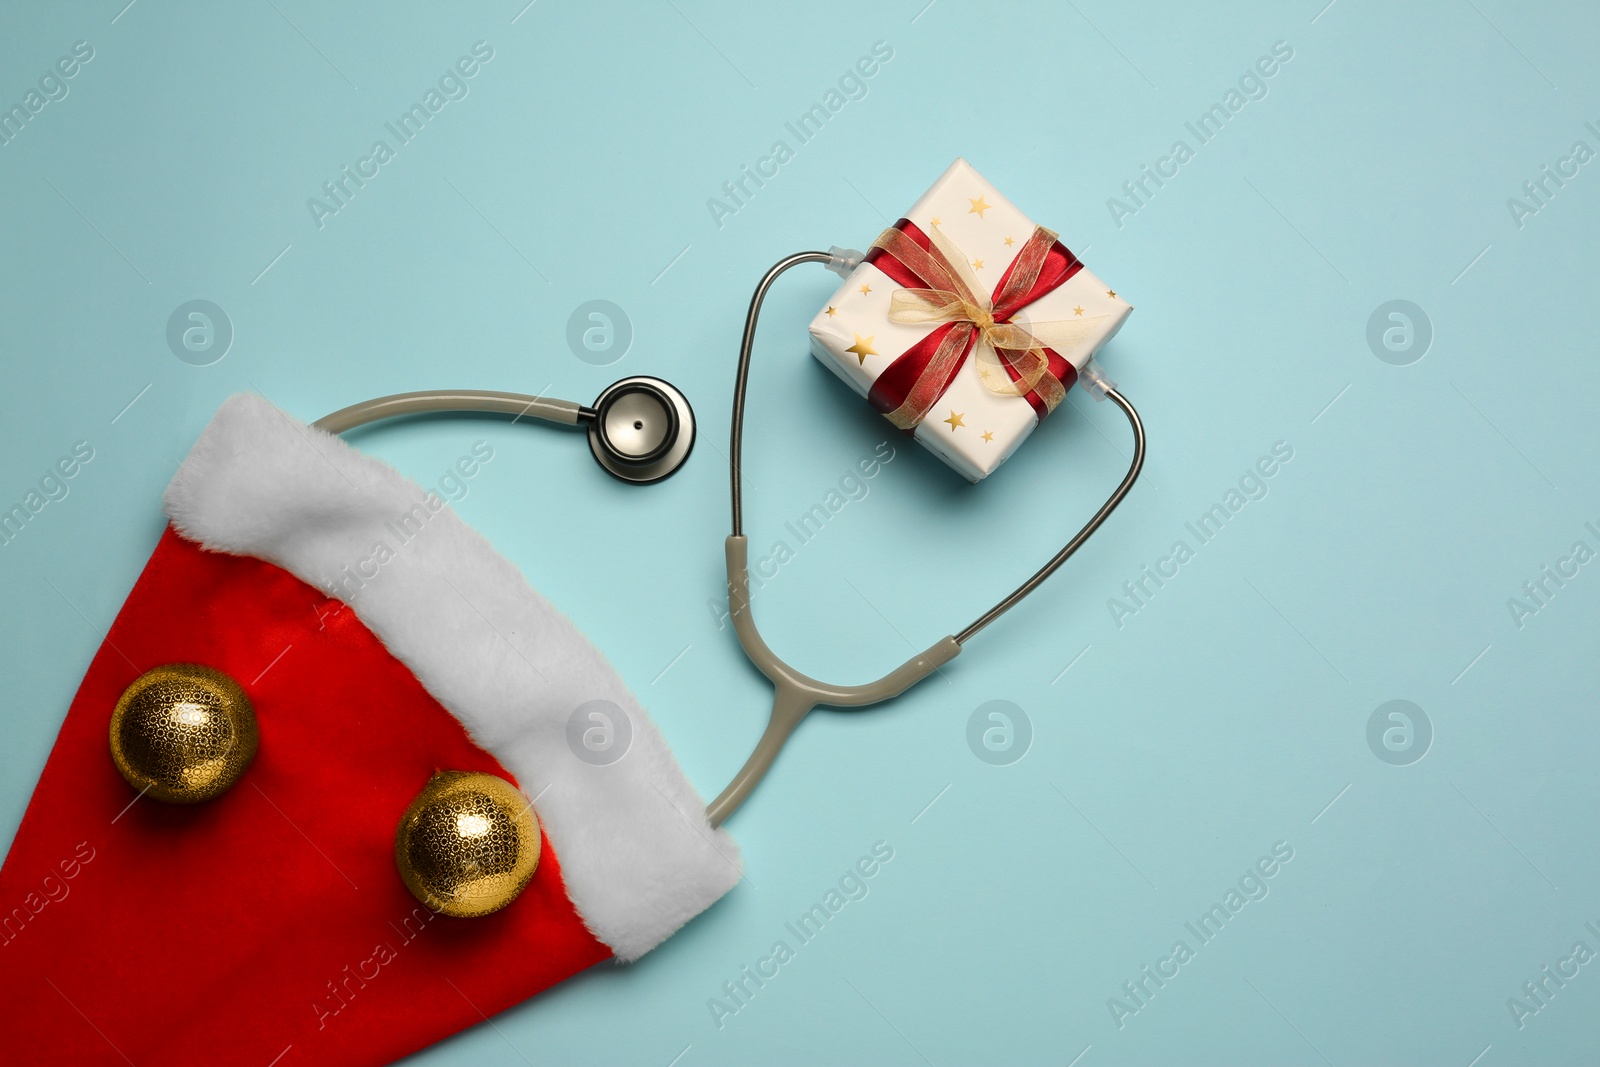 Photo of Greeting card for doctor with stethoscope, gift box, Santa hat and Christmas decor on light blue background, flat lay